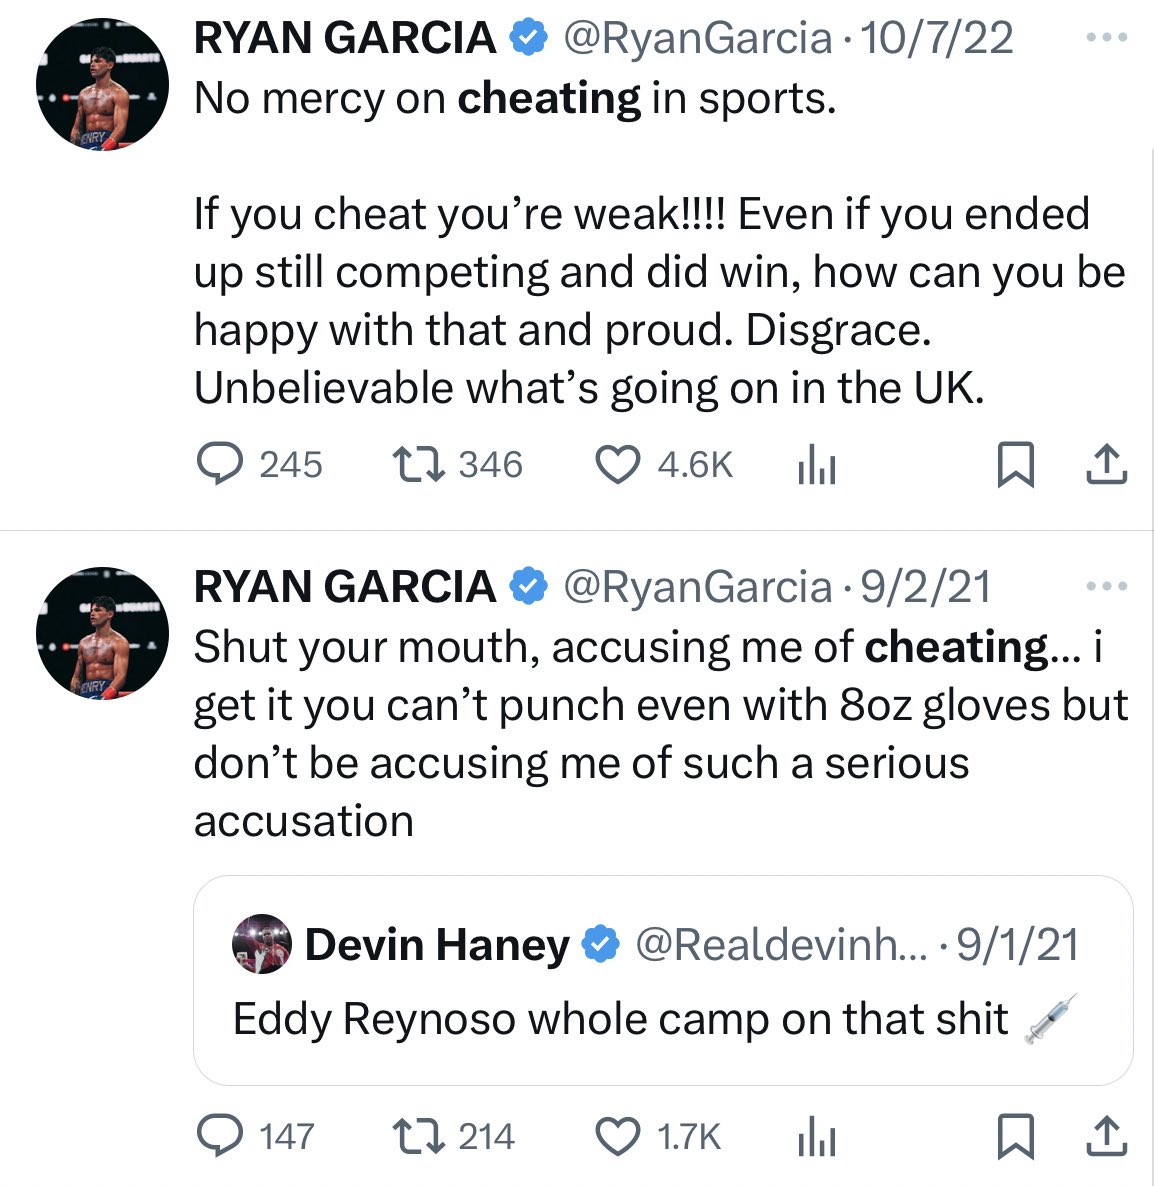 Ryan Garcia is actually cooked and won’t be looked at the same if he actually was on peds